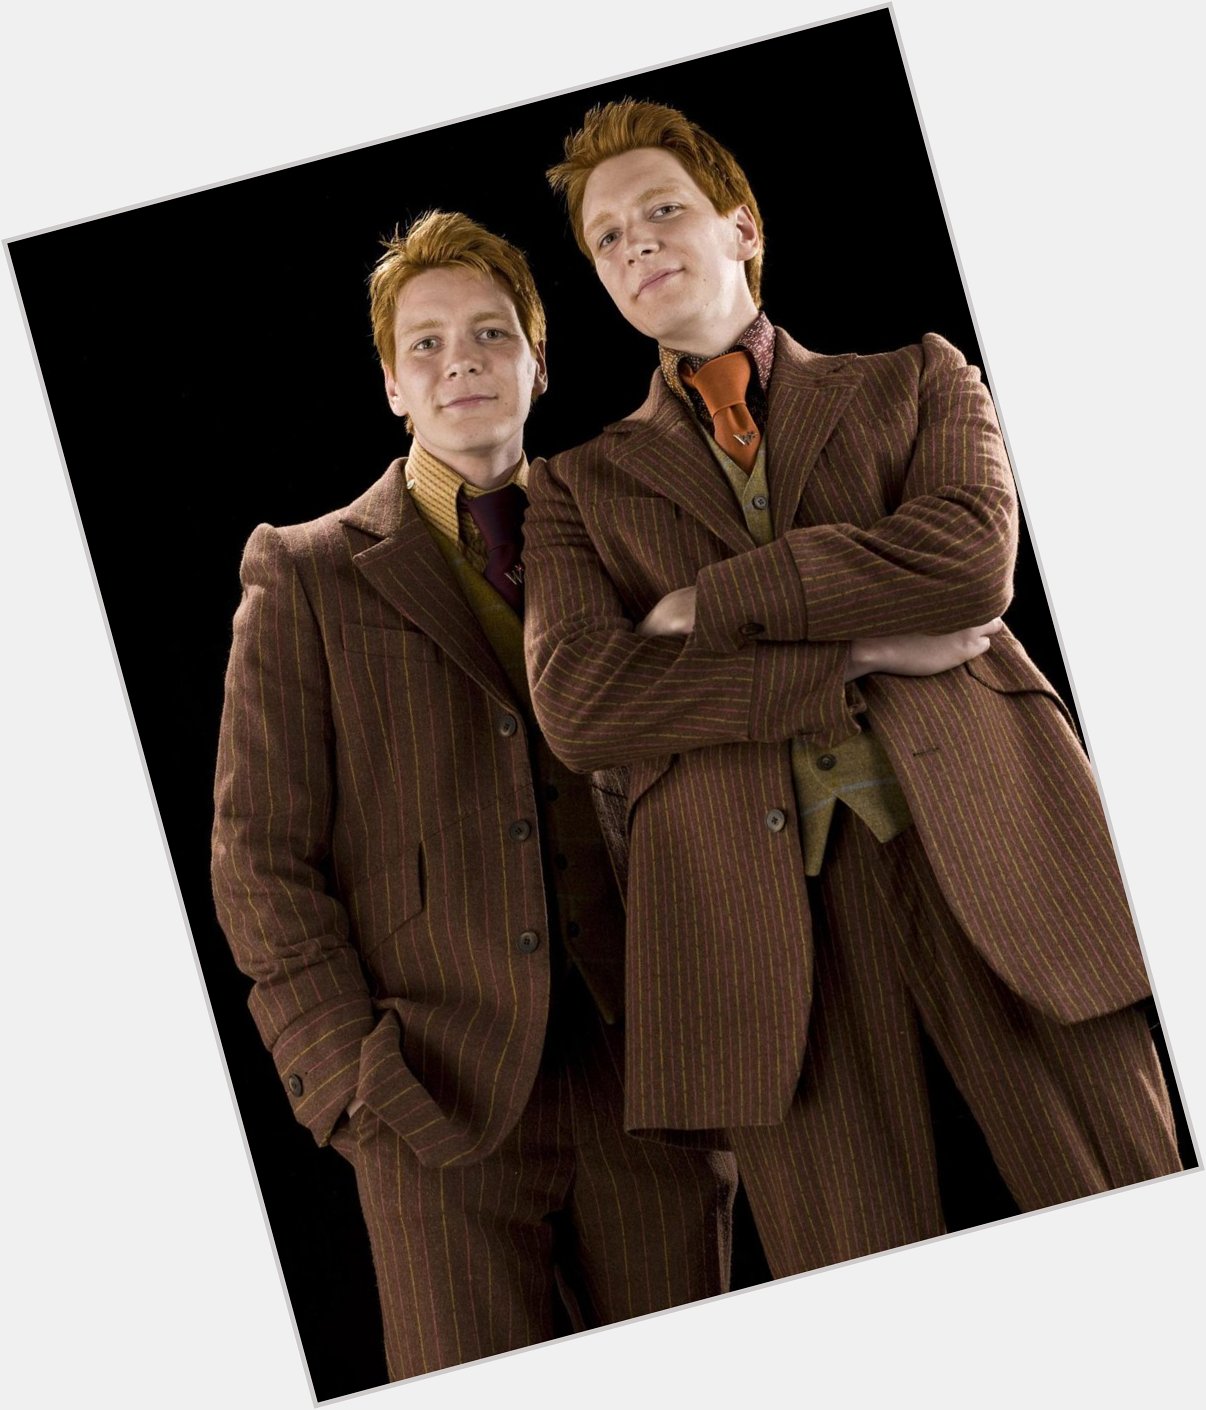 Happy birthday to & Fred & George in who are 29 yrs old on Feb. 25!! 